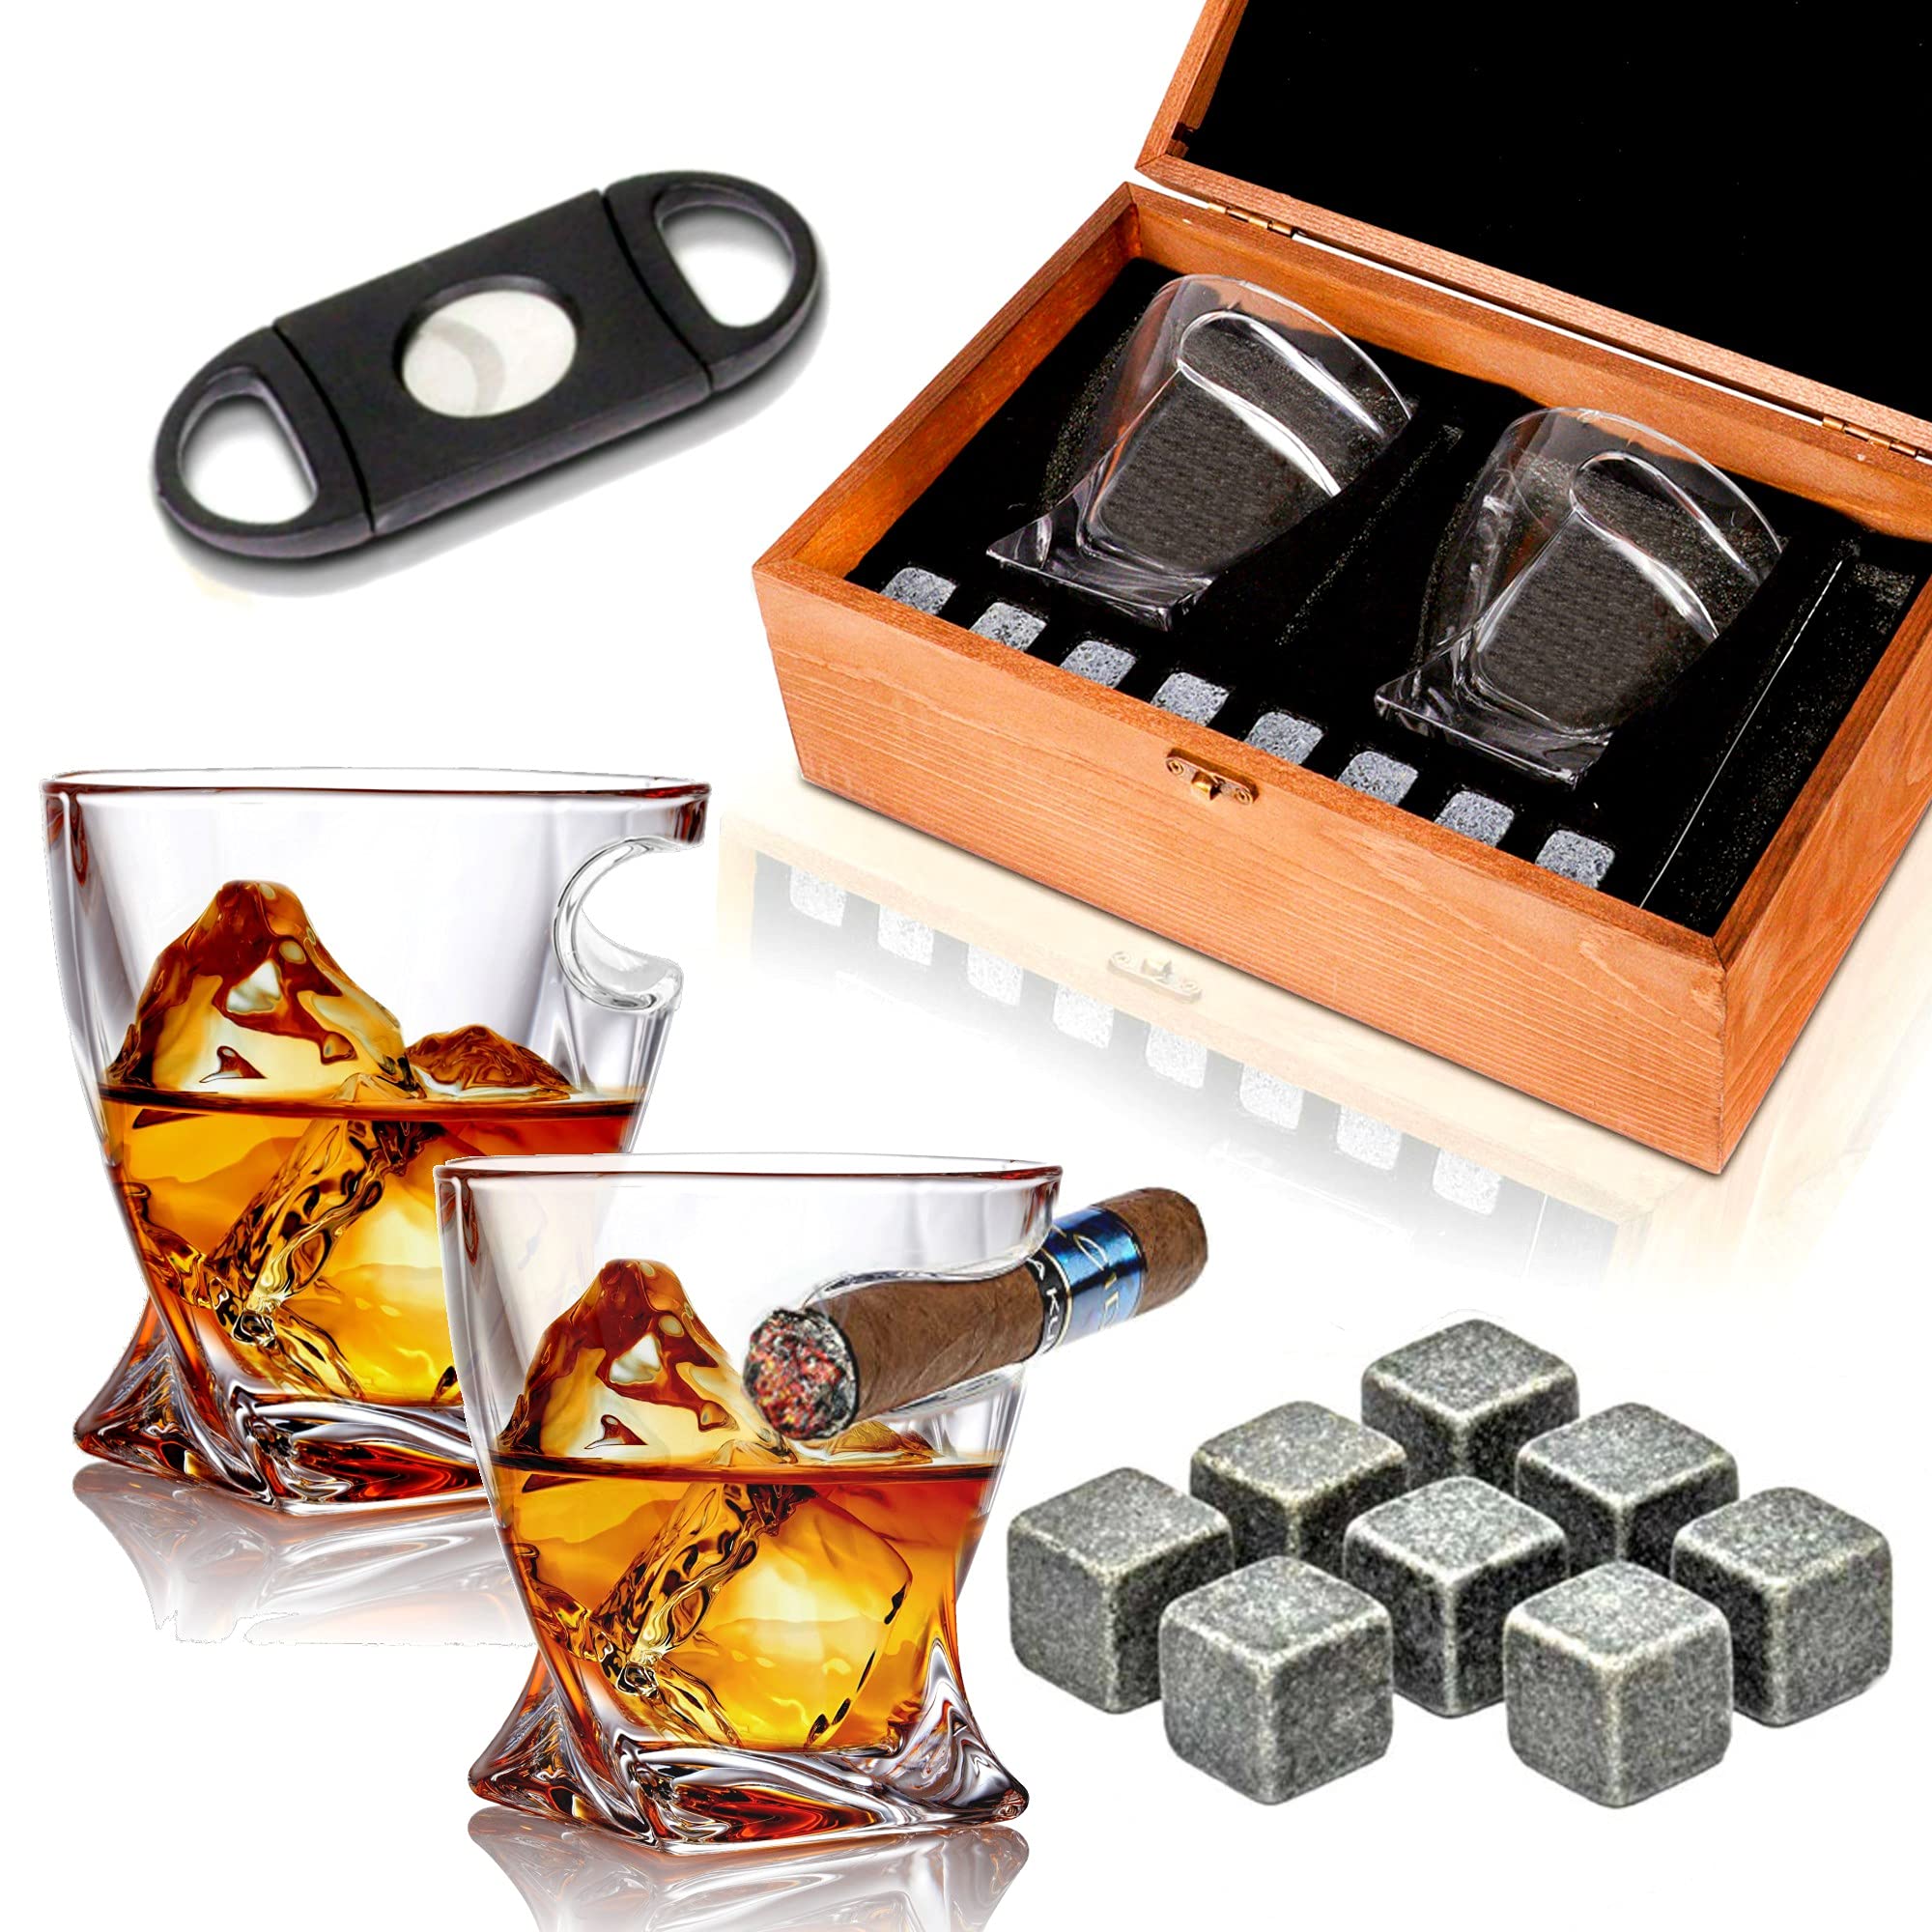 Bezrat Old Fashioned Whiskey Cigar Glasses With Side Mounted Cigar Holder + Whisky Chilling Stones and accessories in Wooden Box - Scotch Bourbon S...